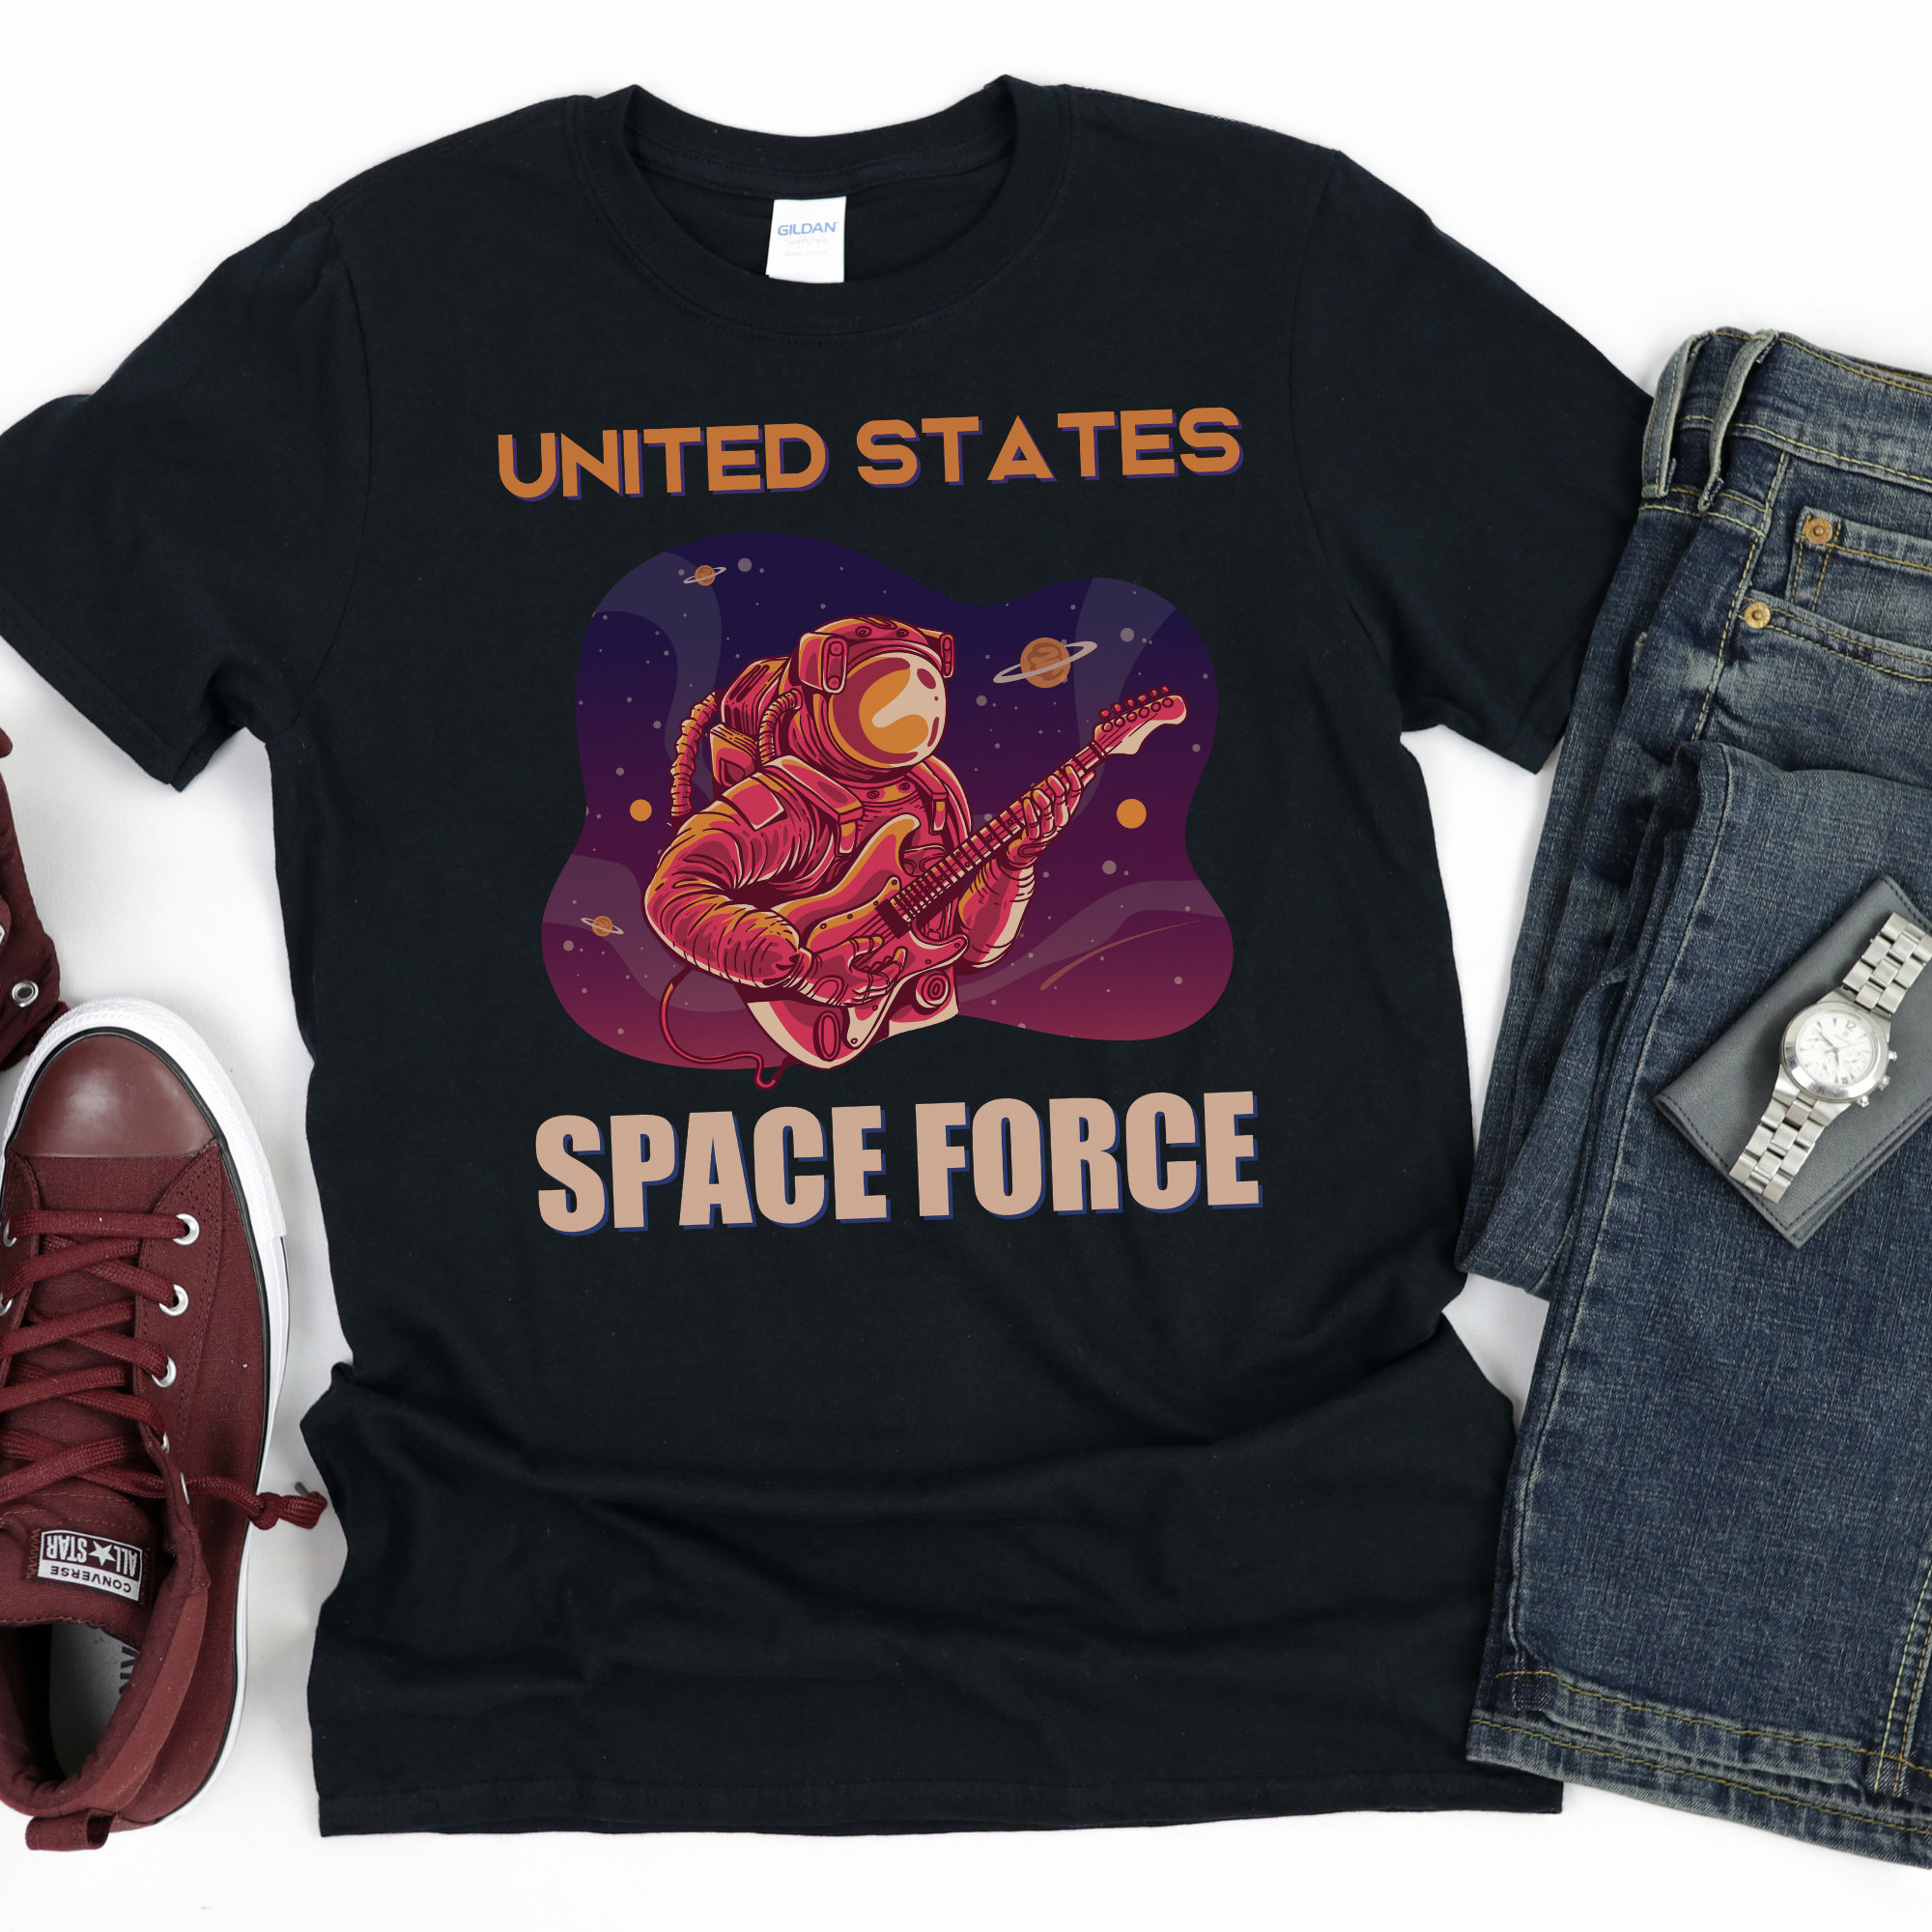 United States Space Force Shirt US Space Force Shirt Outer | Etsy